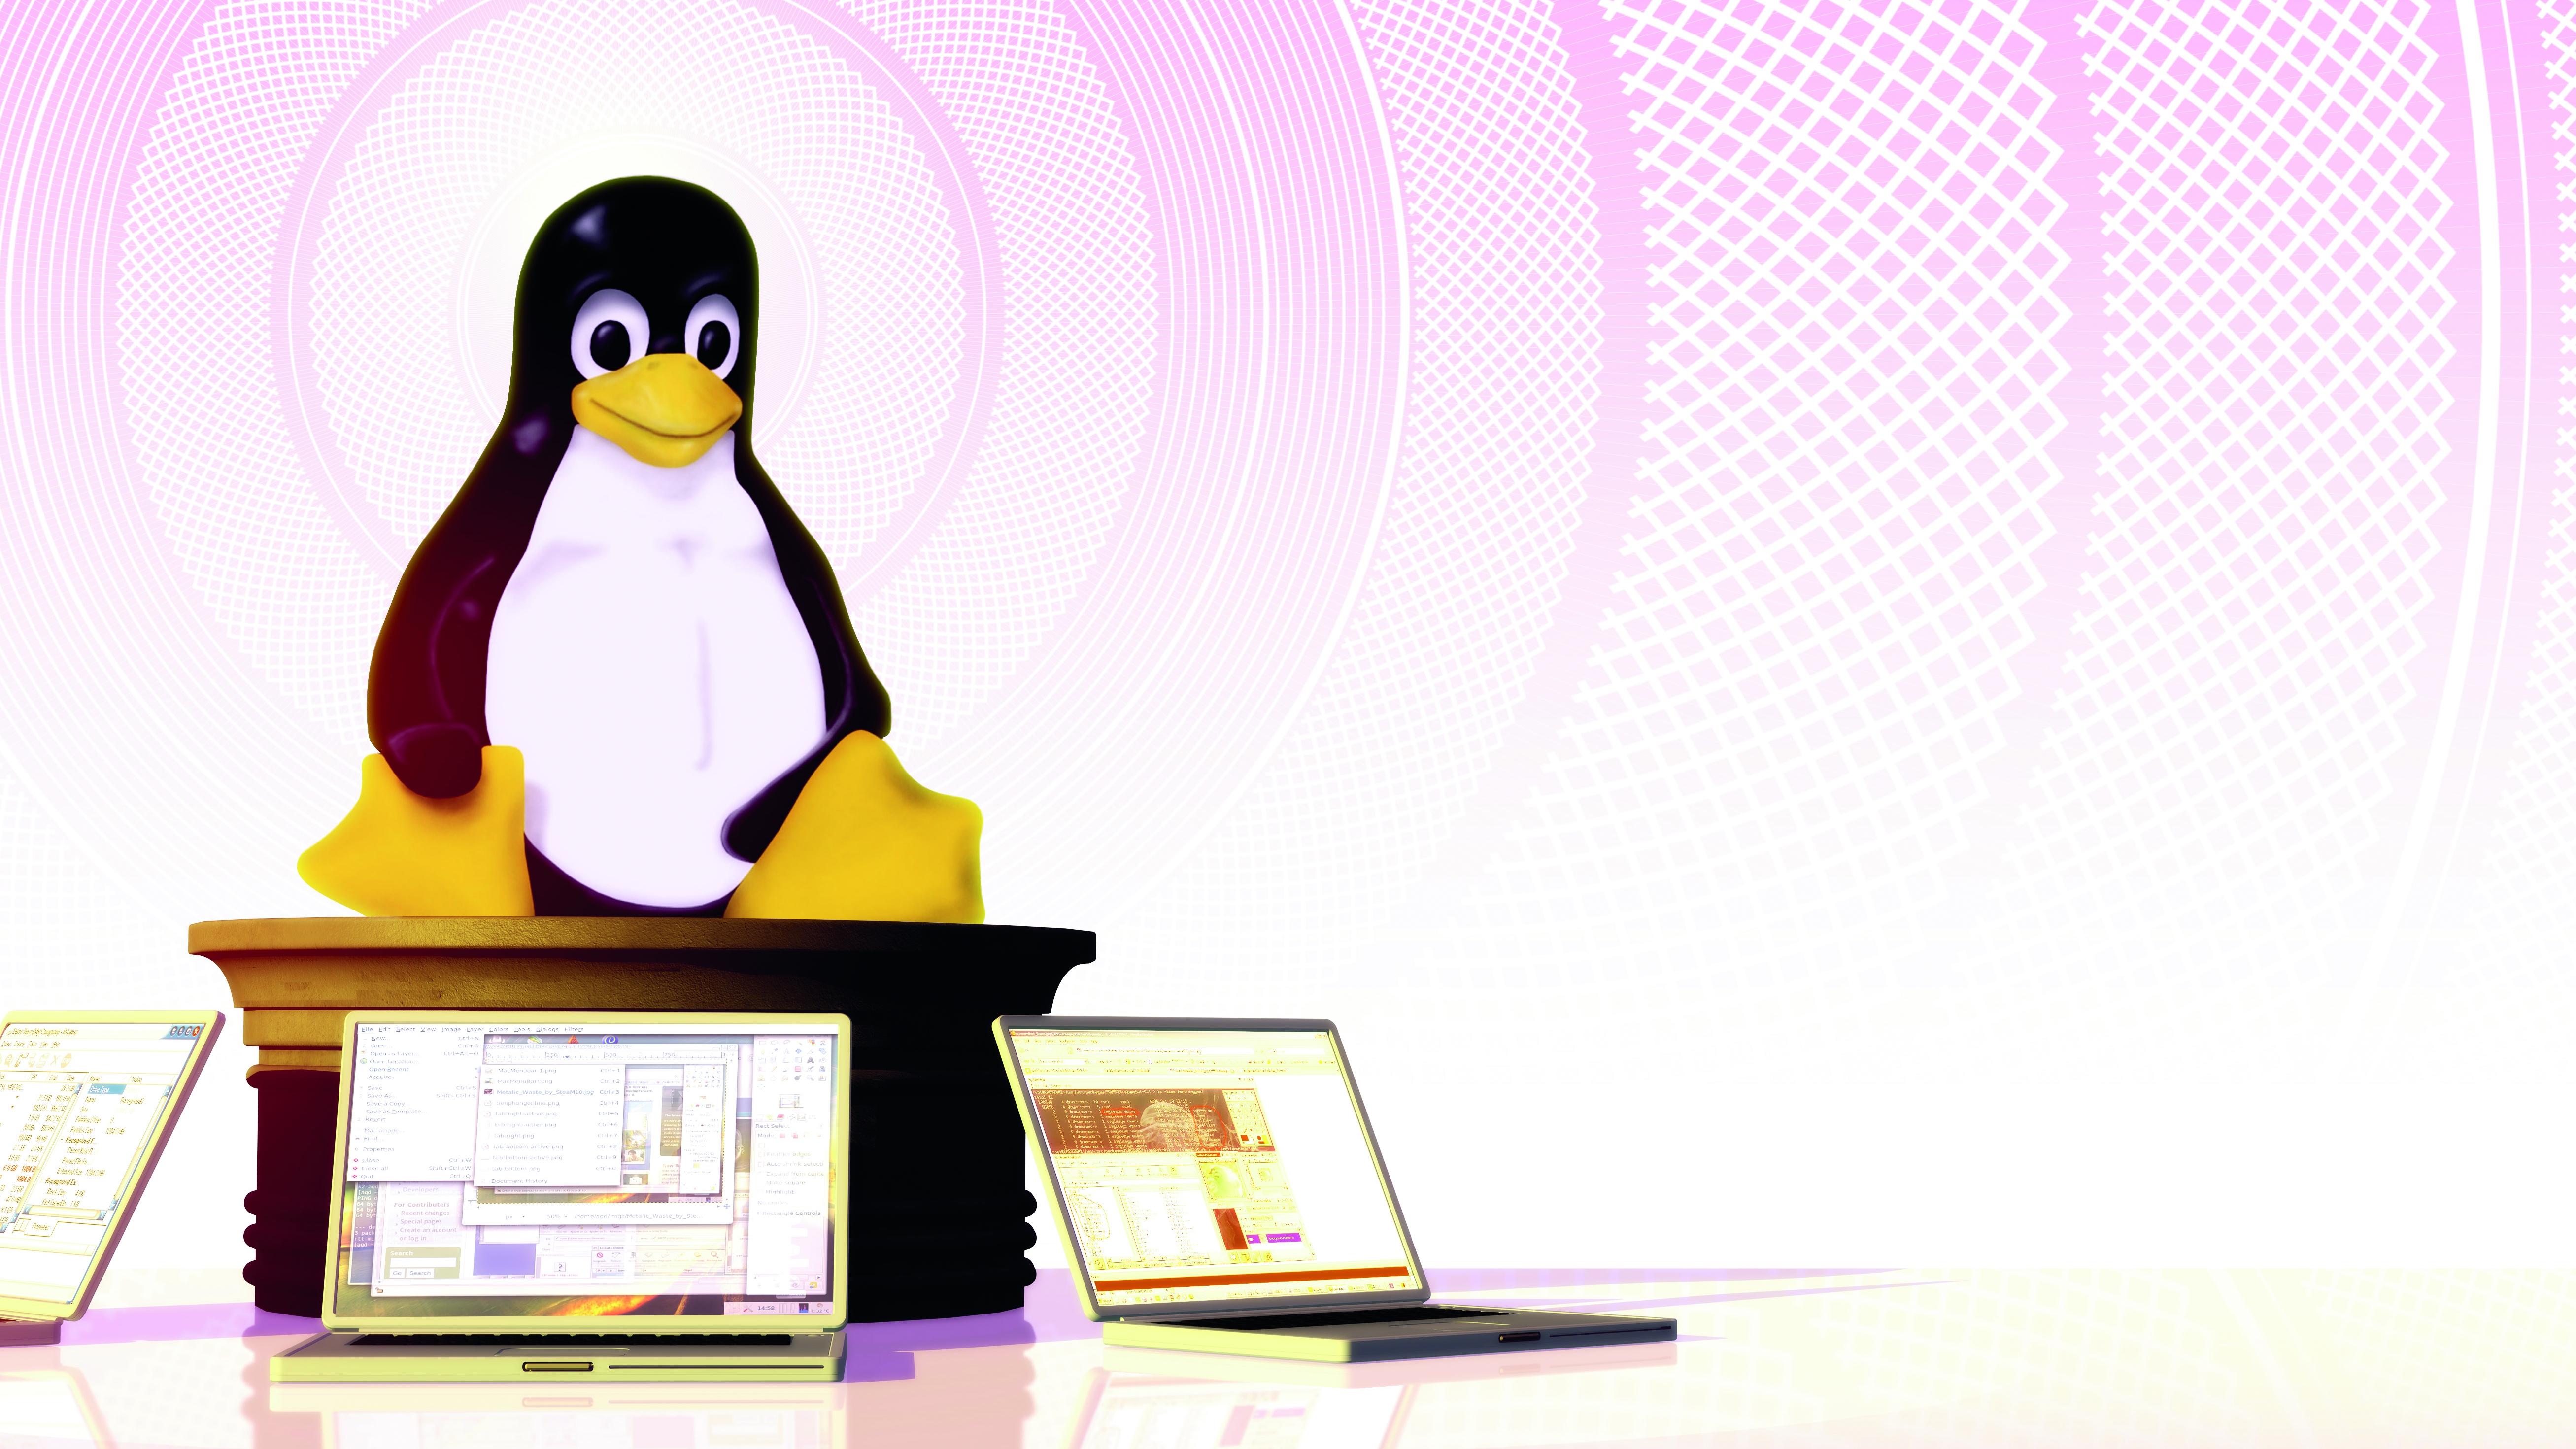 How to use linux